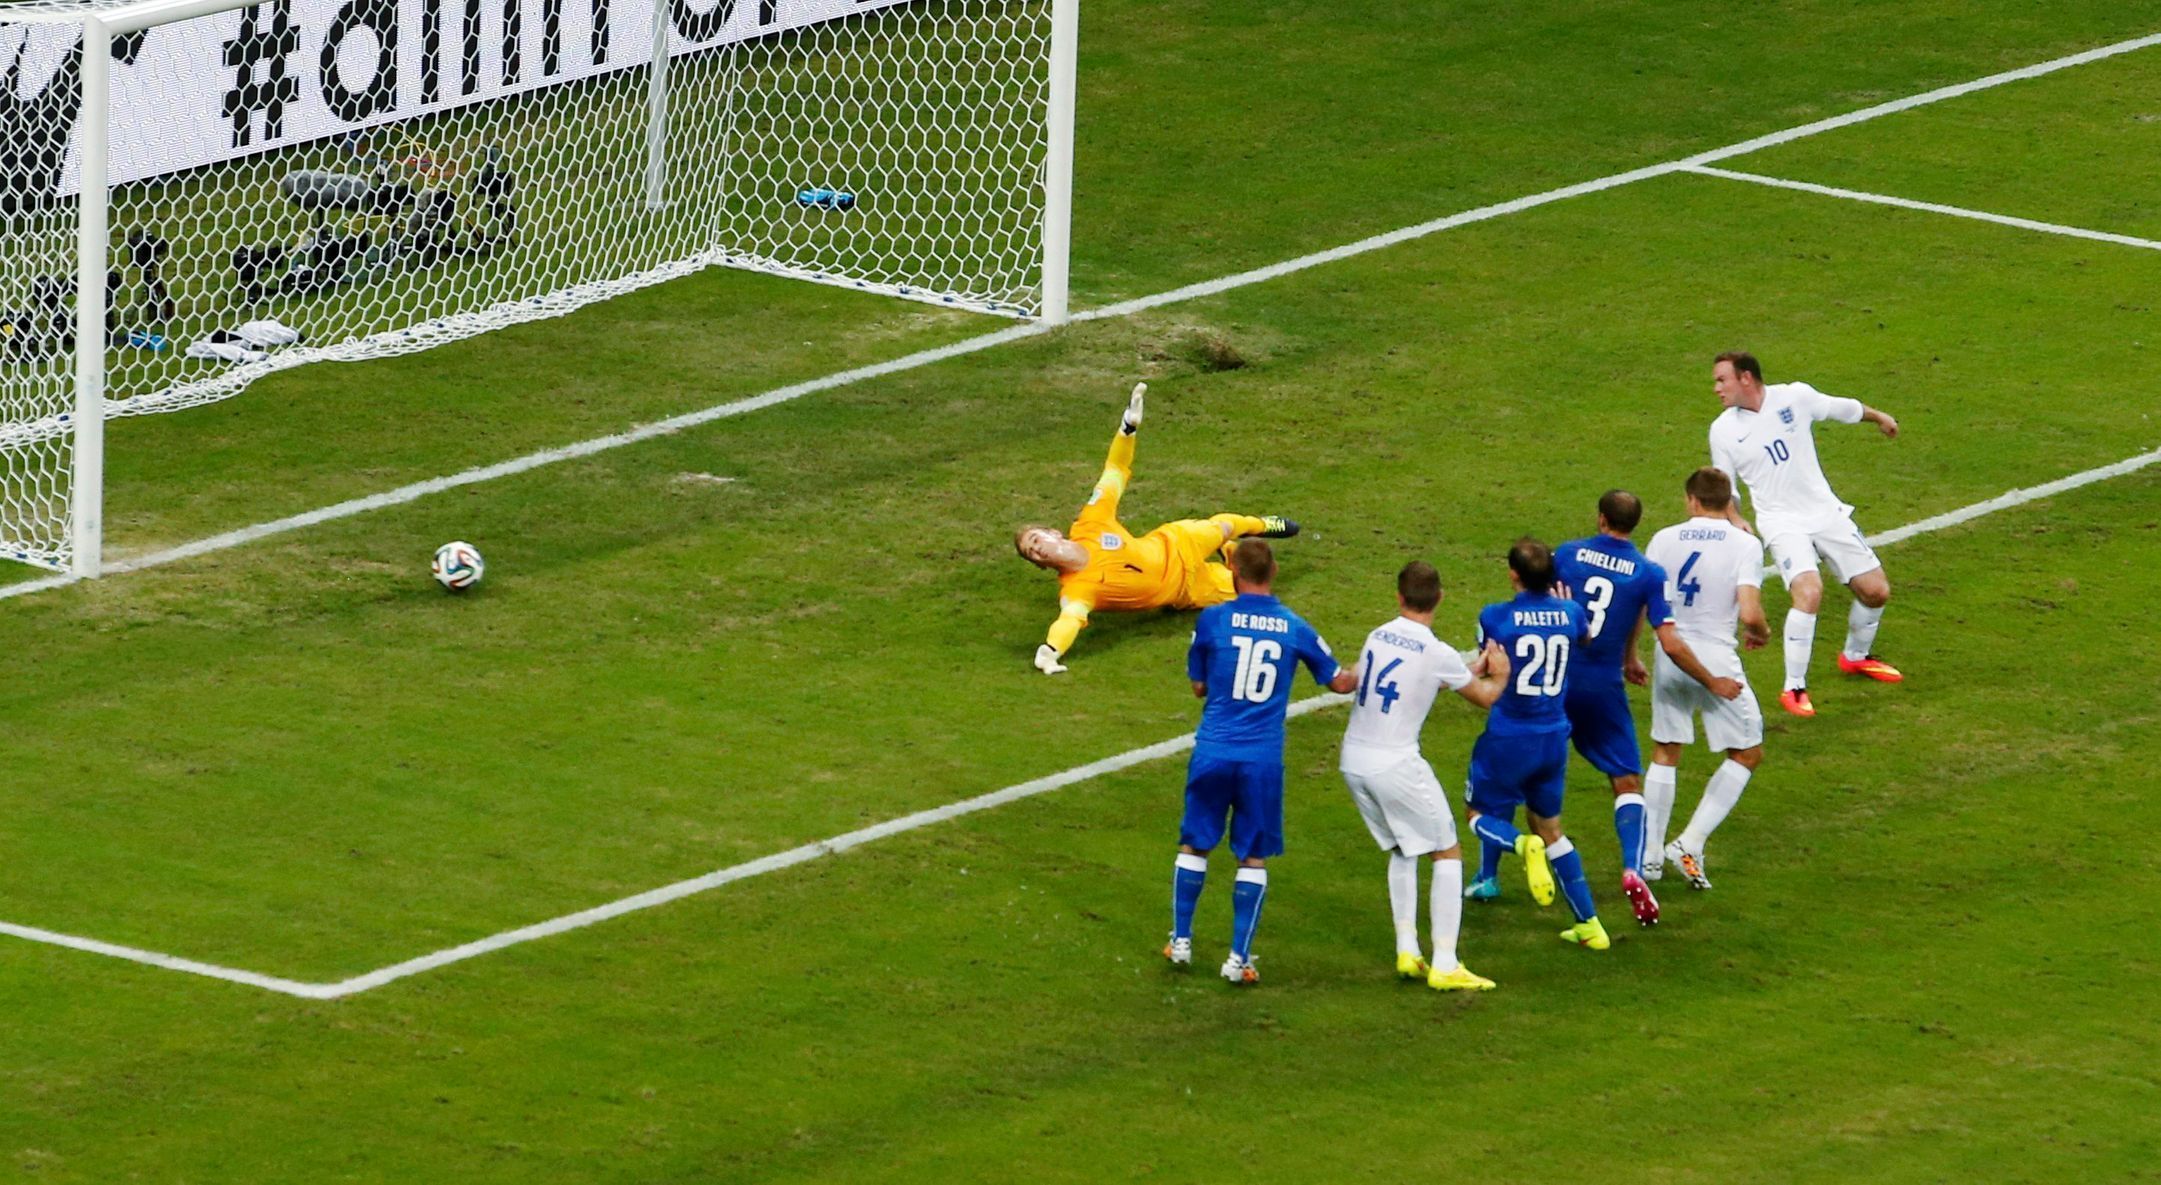 England's goalkeeper Hart concedes a goal by Italy's Marchisio during their 2014 World Cup Group D soccer match at the Amazonia arena in Manaus